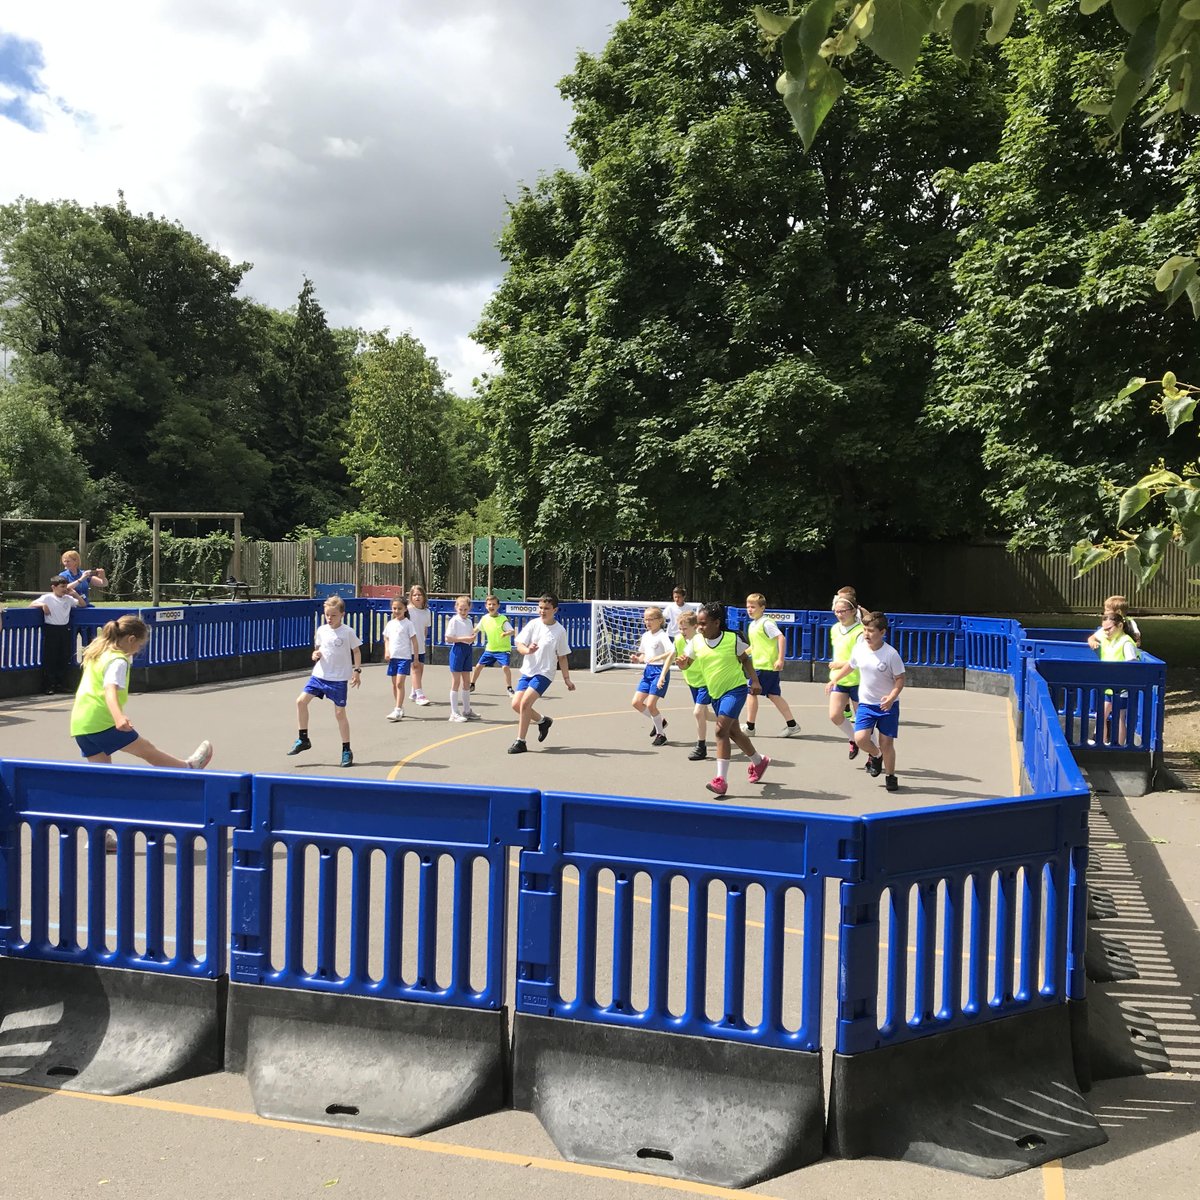 Don't let muddy fields stop play...
Our Smooga Arenas turn your playground into a brilliant multi-use games area and can be purchased using your School Sports Premium.
Find out more smooga.co.uk

#playgroundfencing #playgroundequipment #sportsfencing #schools